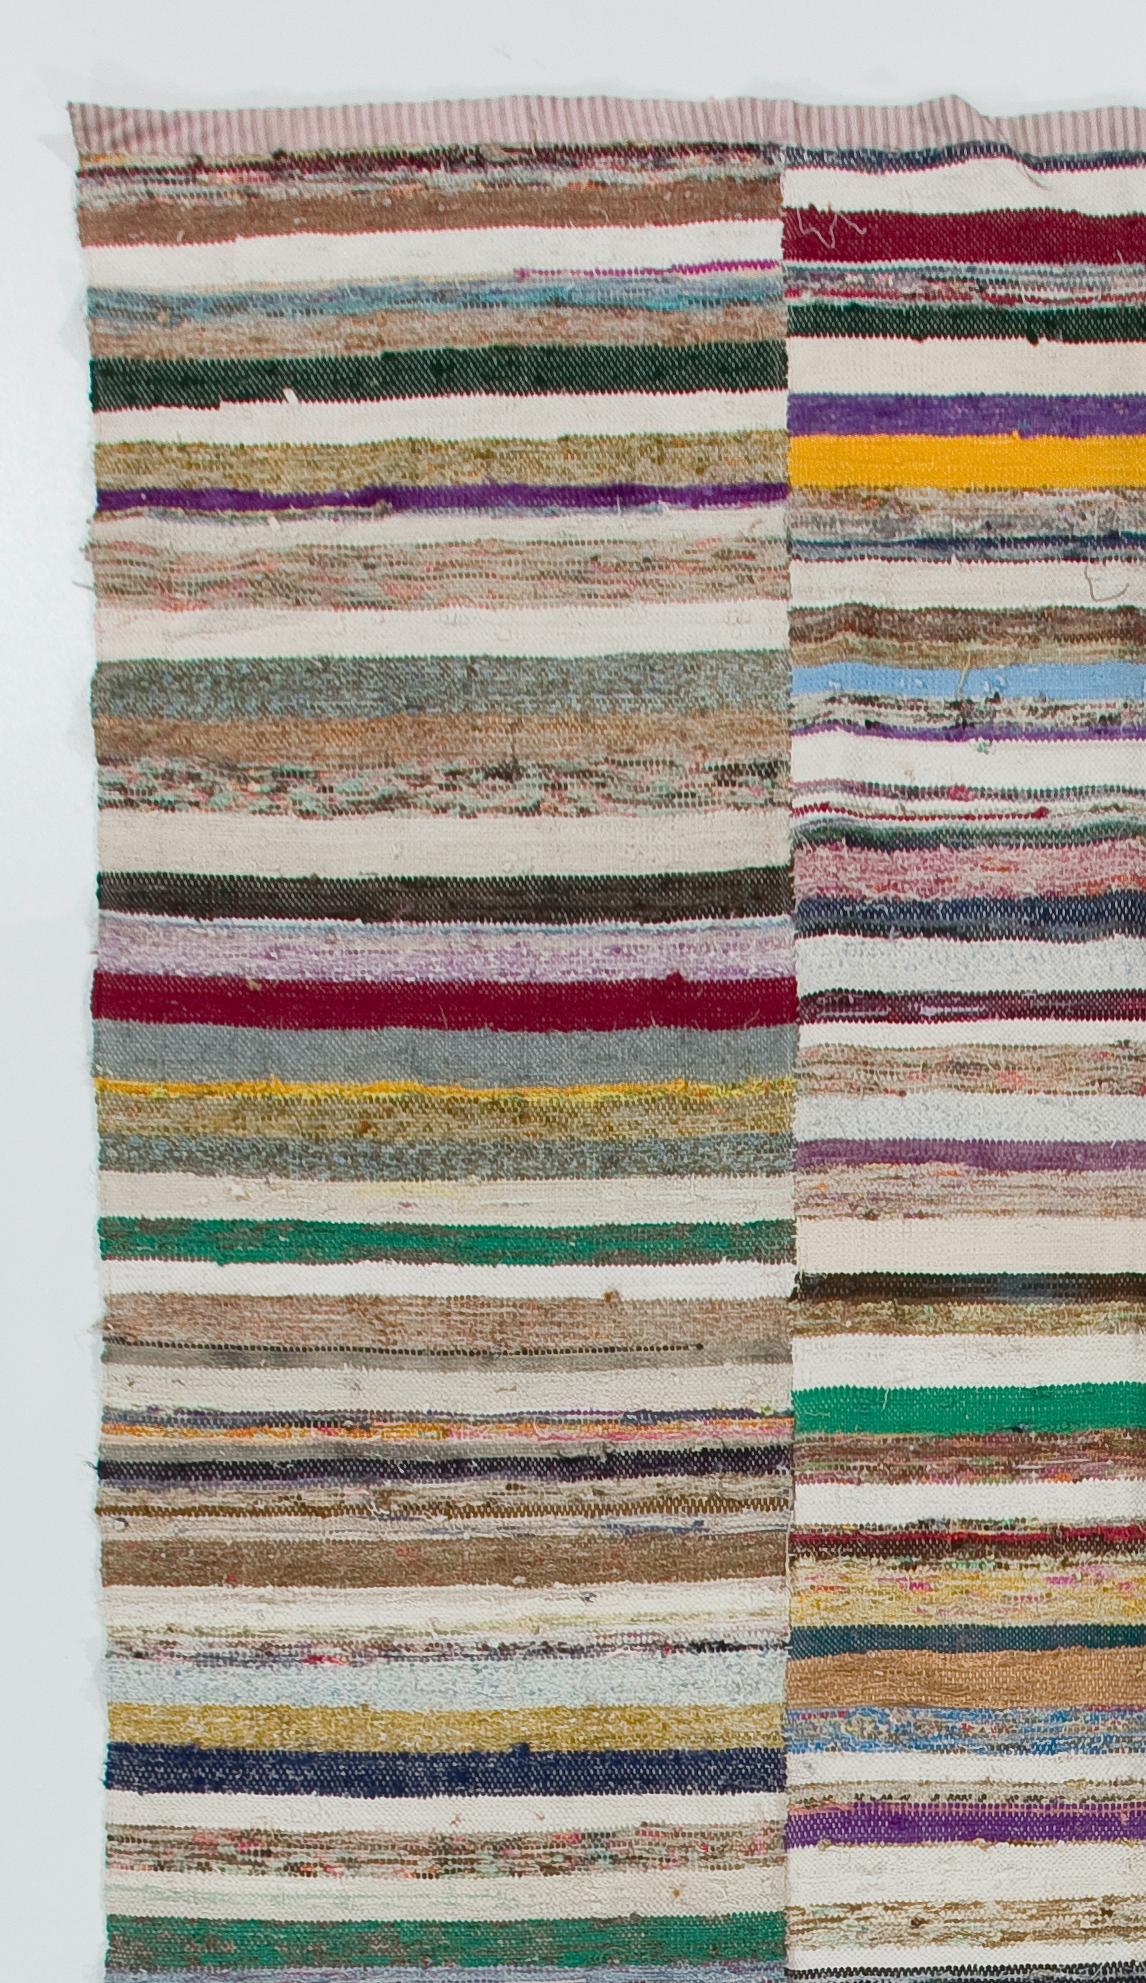 These authentic flat-weaves (Kilims) from Eastern Turkey were handwoven by Nomads circa mid-20th century to be used as floor coverings in their tents and winter homes. They were made to use for everyday life rather than re-sale and export purposes